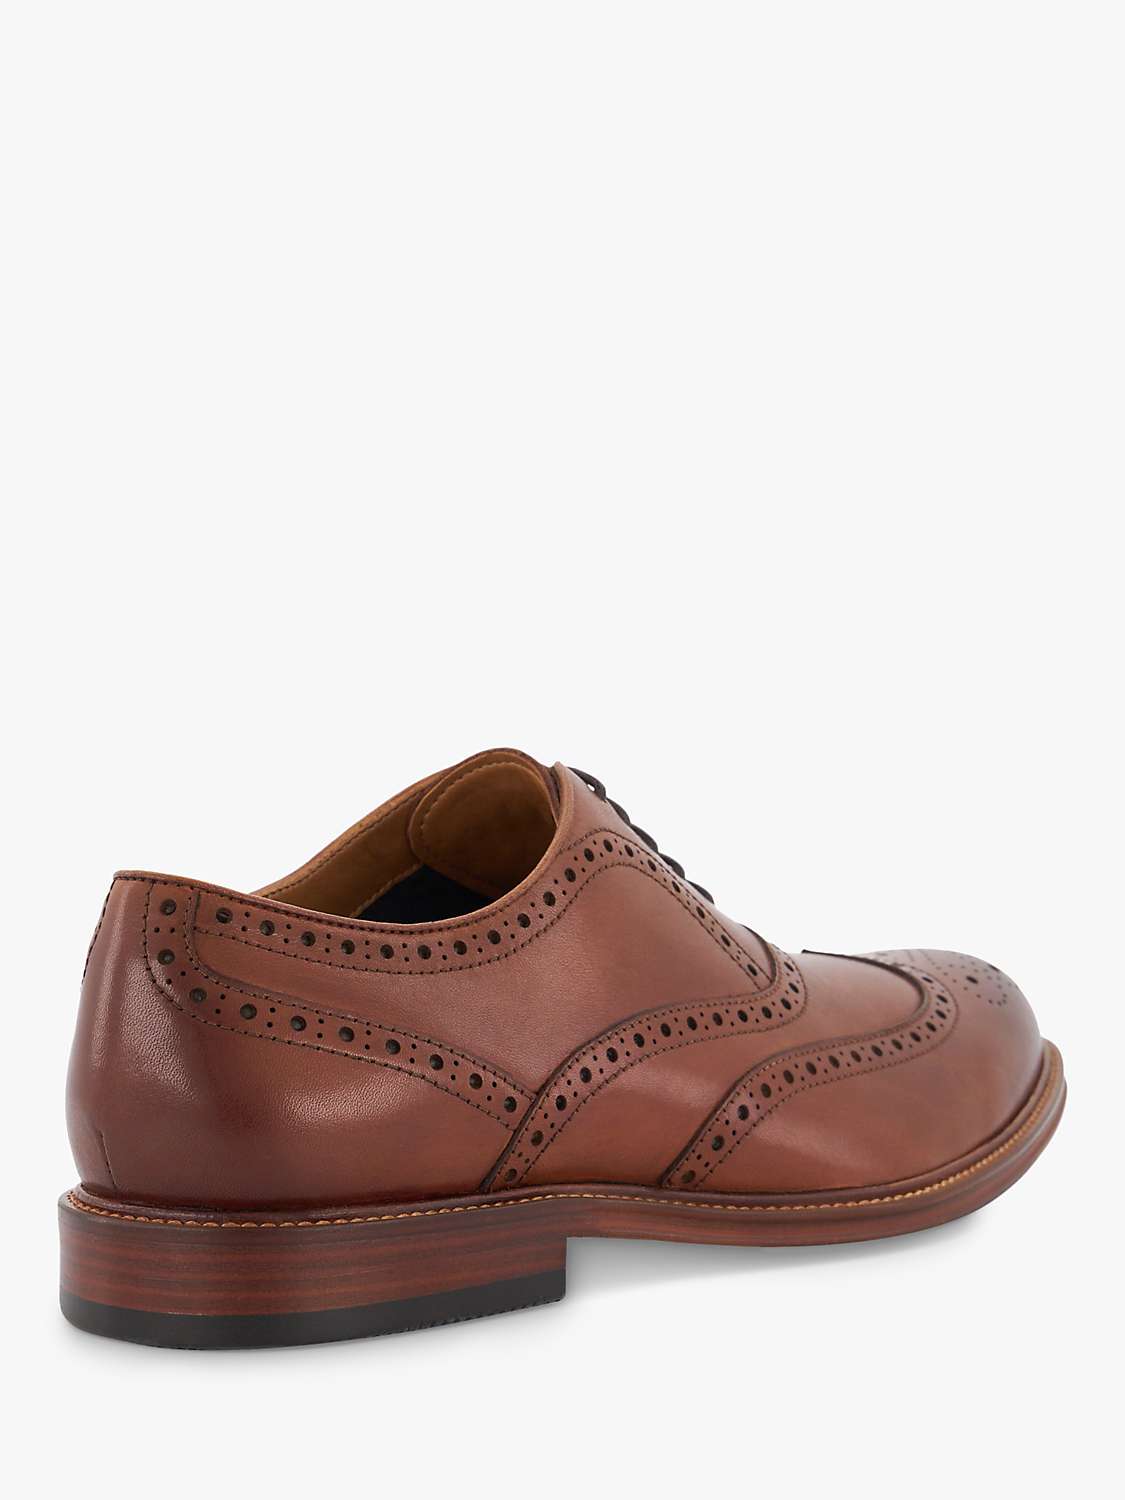 Buy Dune Solihull Leather Brogue Shoes, Tan Online at johnlewis.com